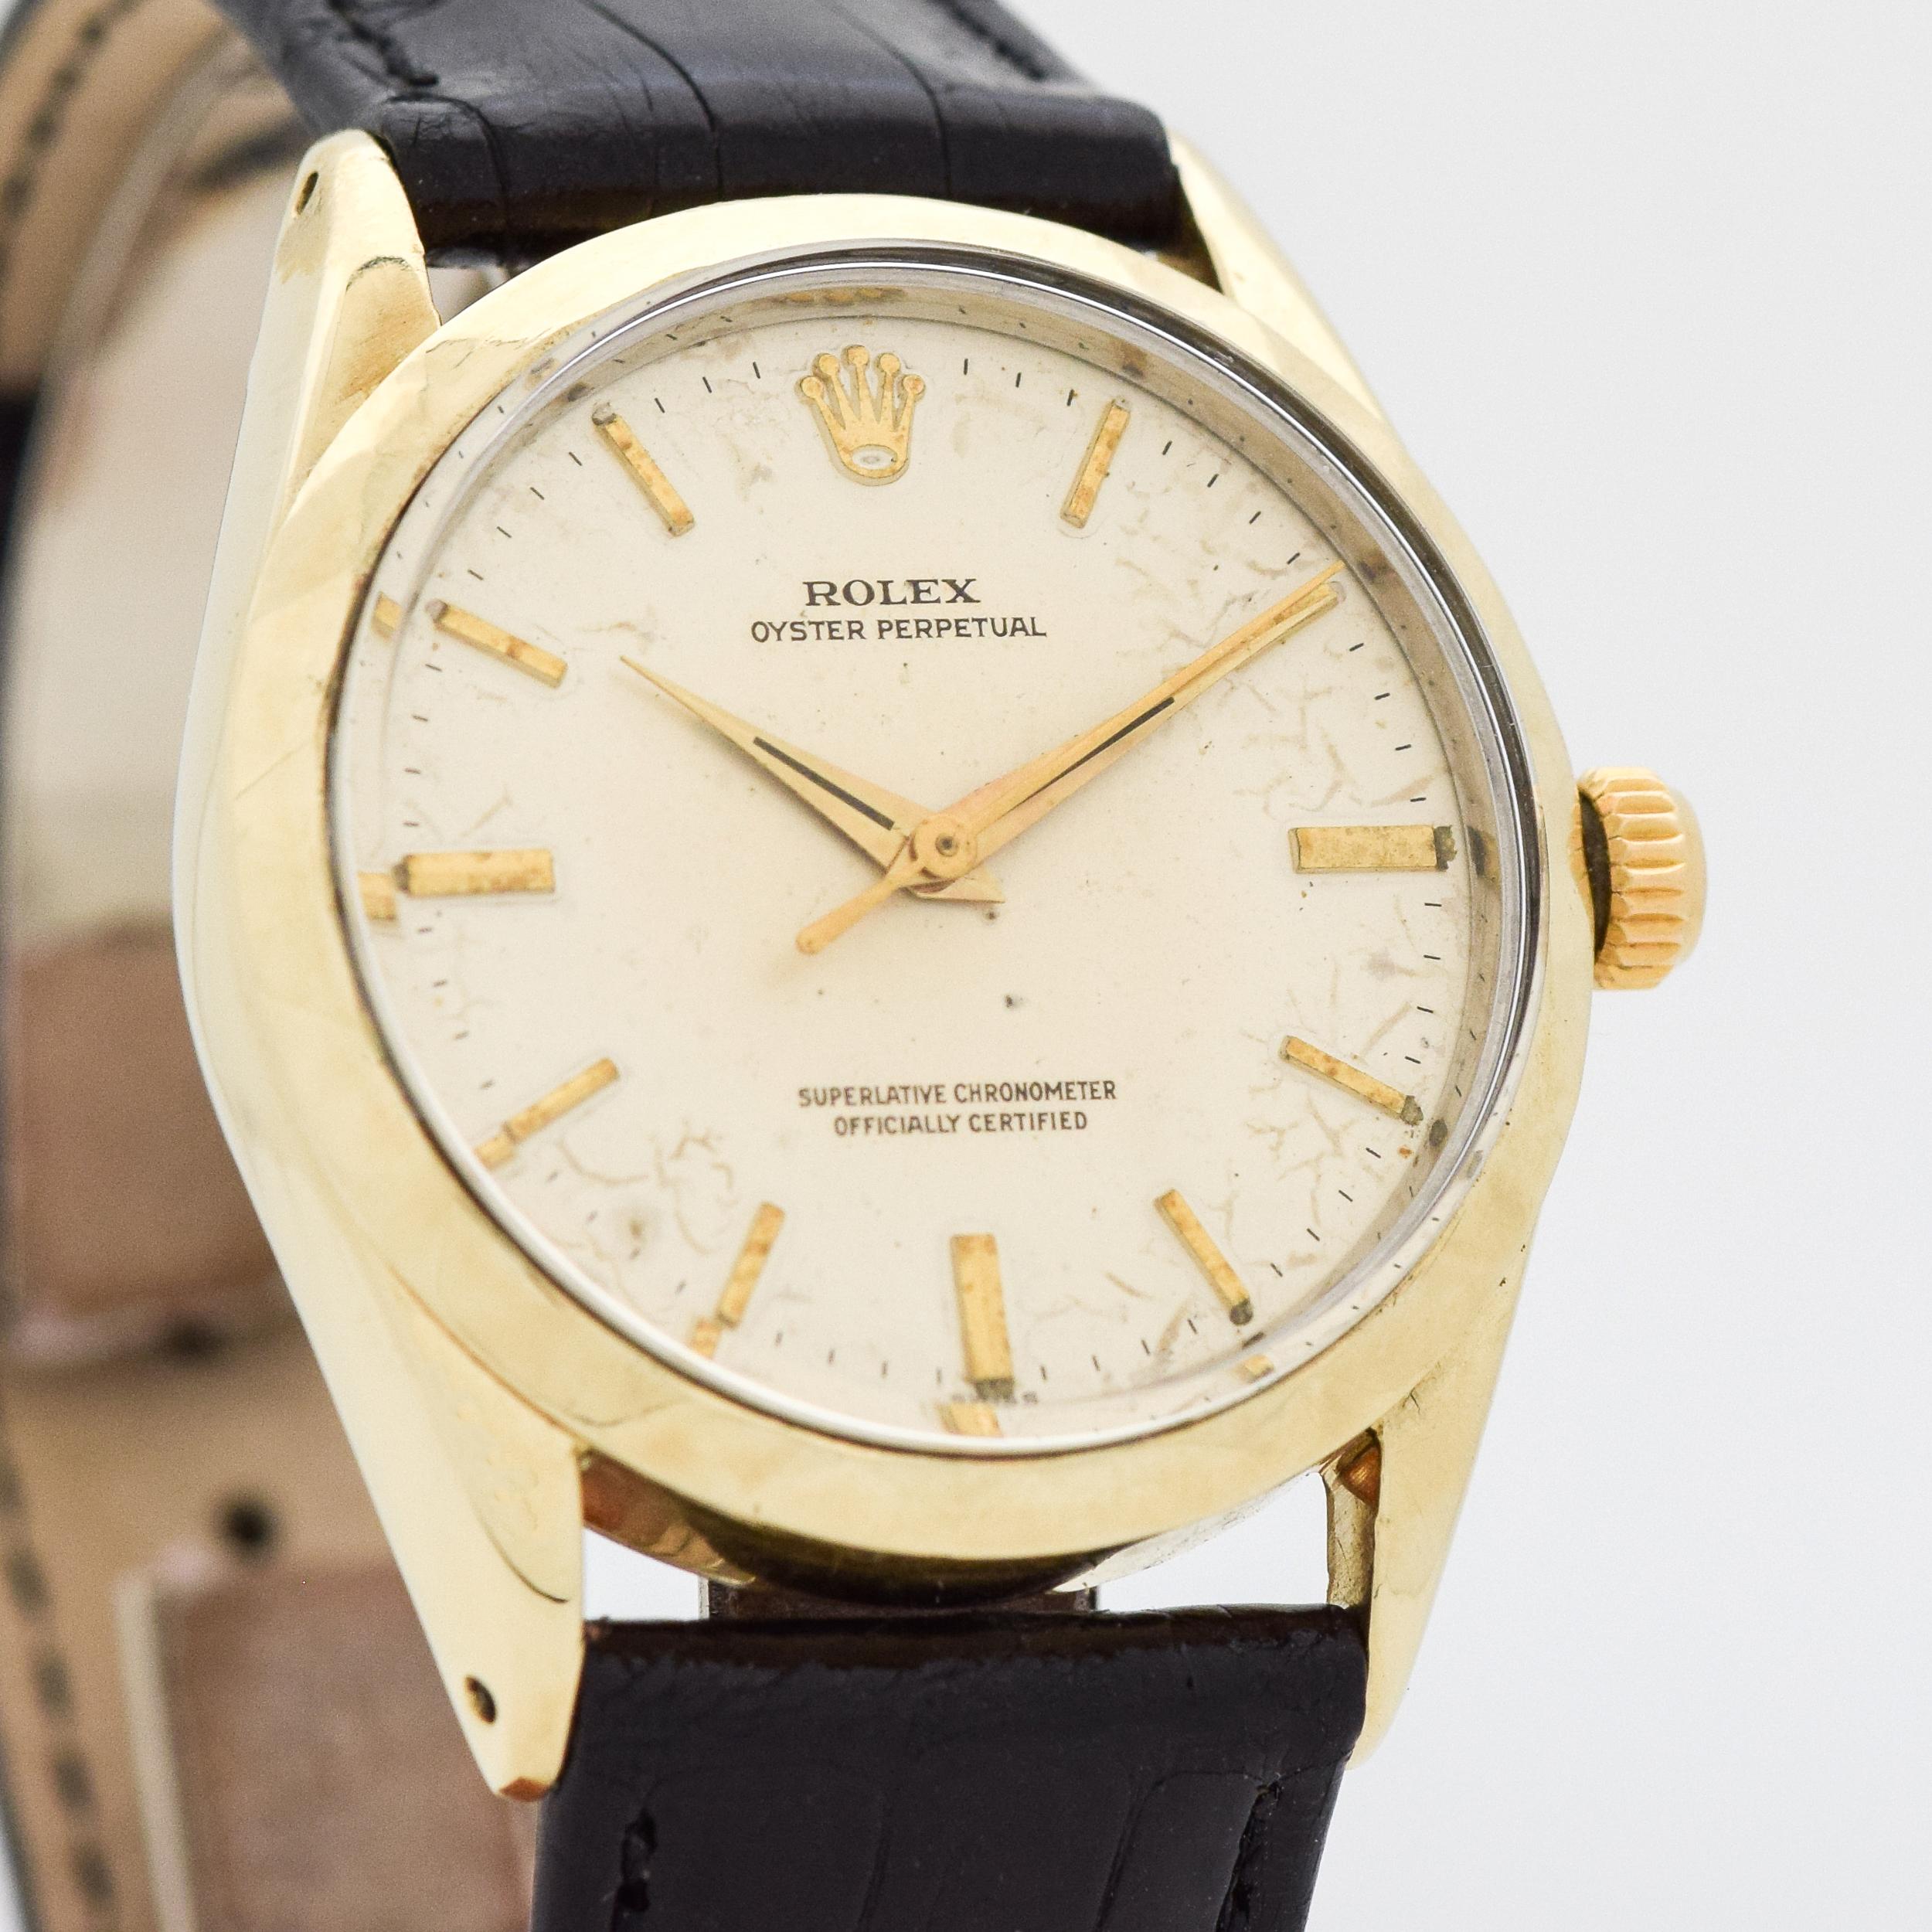 Early 1960's Vintage Rolex Oyster Perpetual Ref. 1025 14k Yellow Gold Shell Over Stainless Steel watch with Rare Unique Triangle Beveled Pattern Bezel with Original Silver Dial with Applied Gold Color Beveled Elongated Arrow Markers. 34mm x 39mm lug